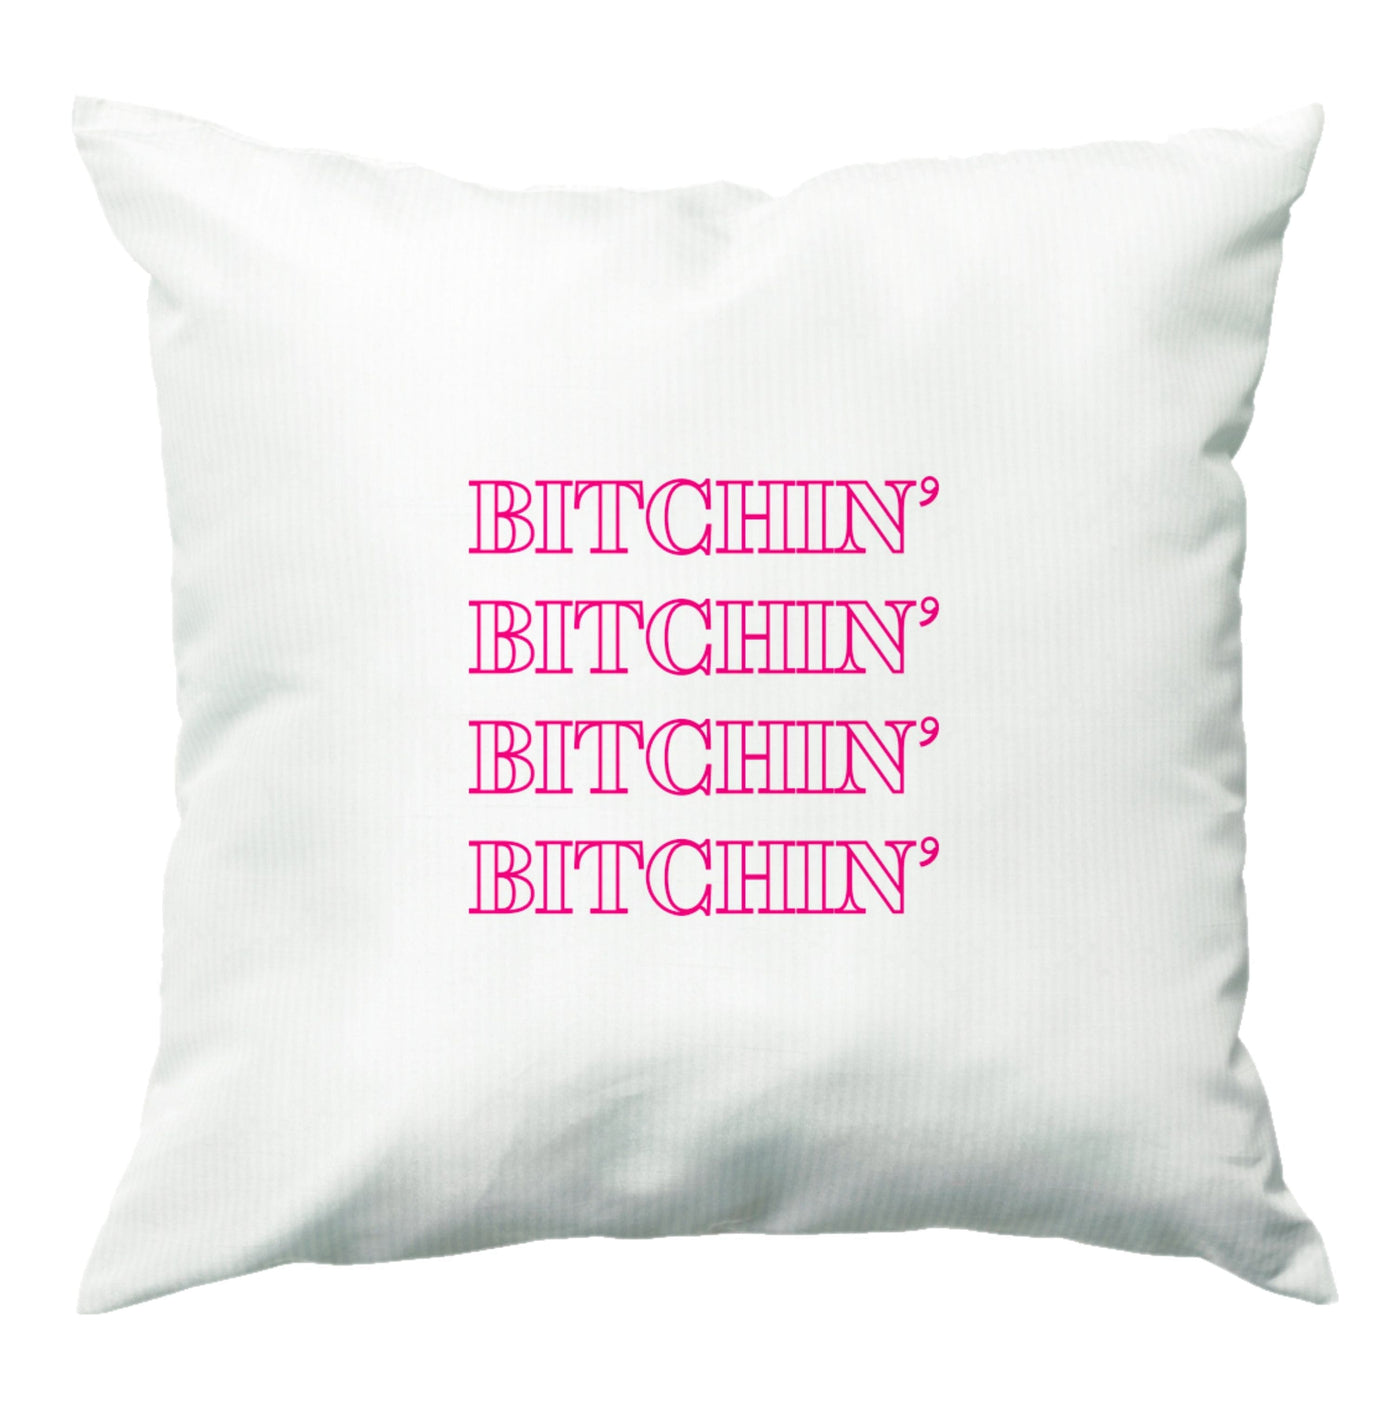 Bitchin' Repeated - Stranger Things Cushion